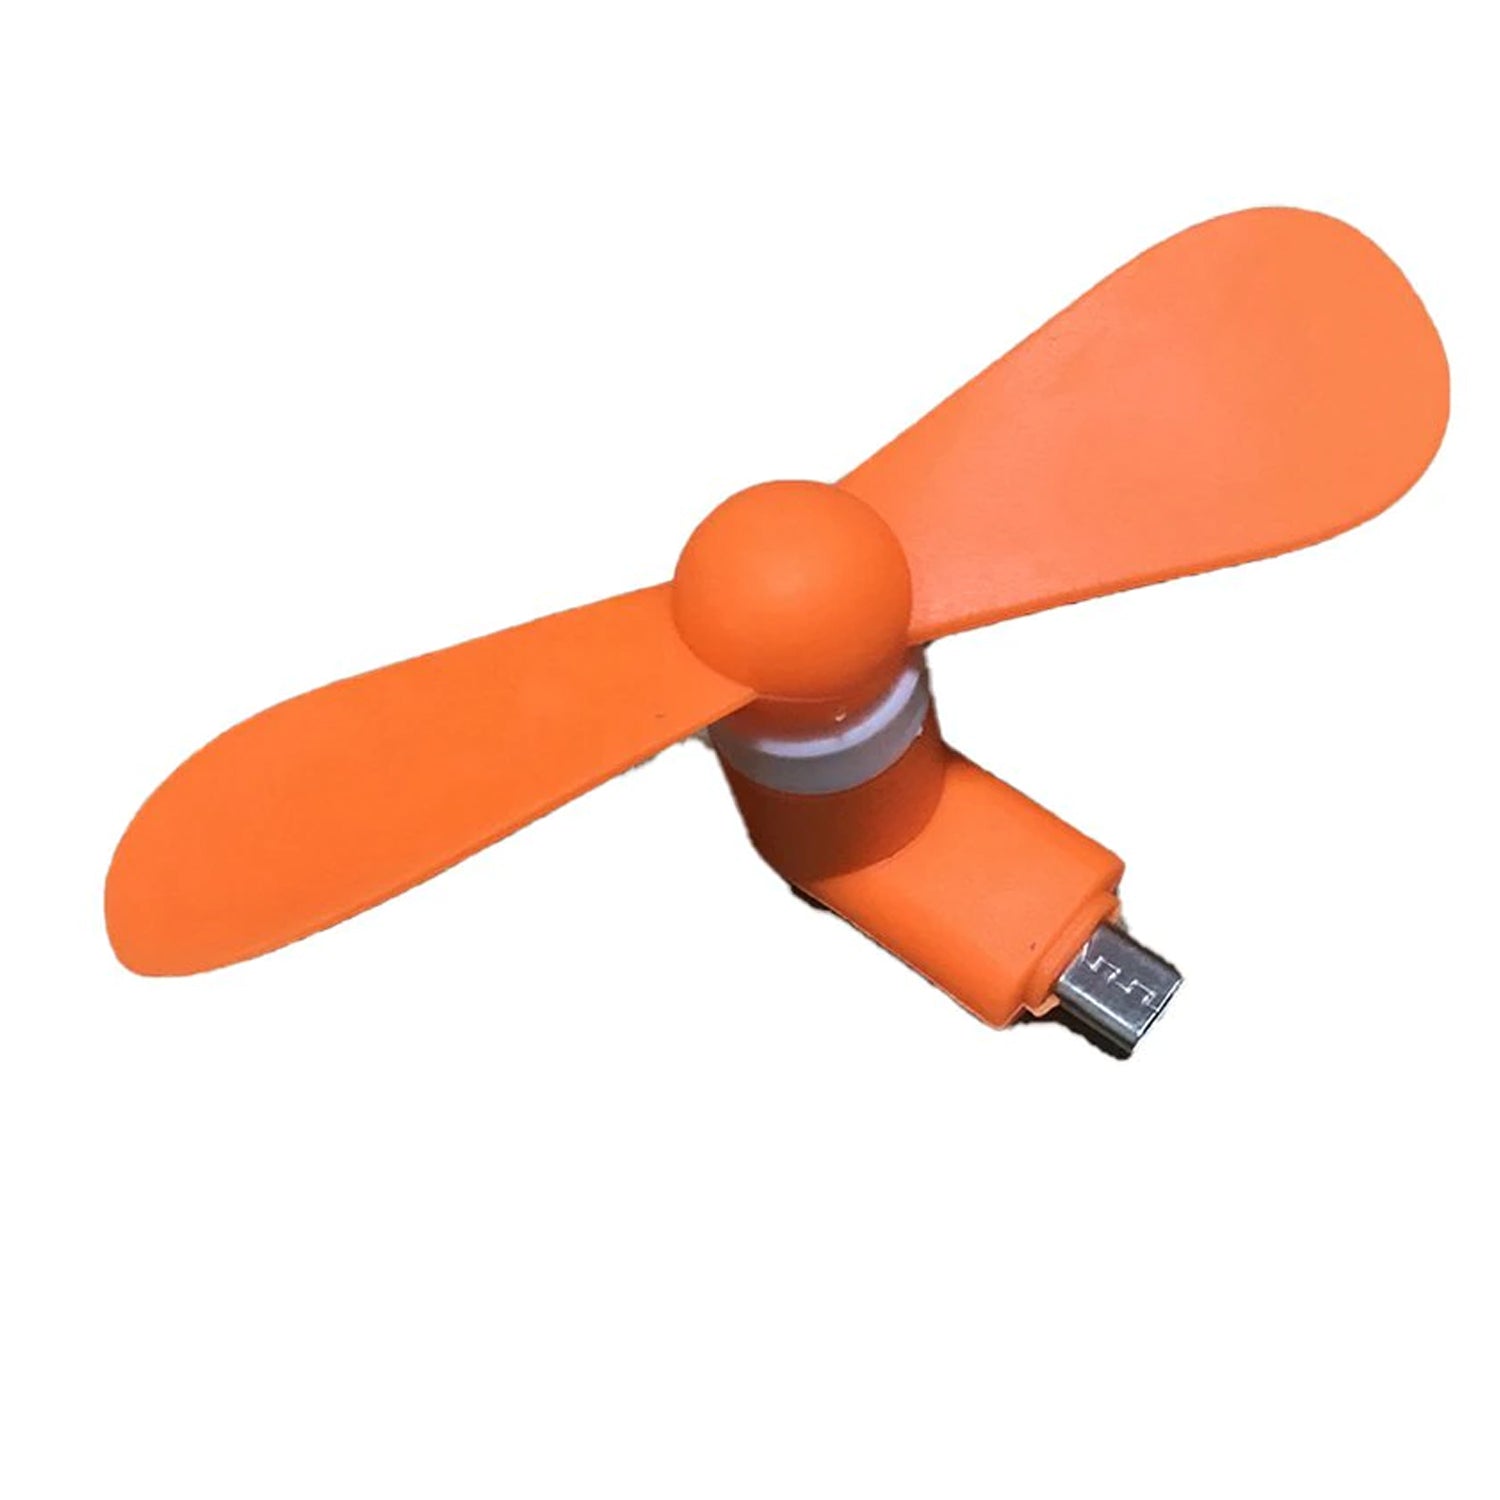 6183 mini usb fan For Having cool air instantly, anywhere and anytime purposes. DeoDap